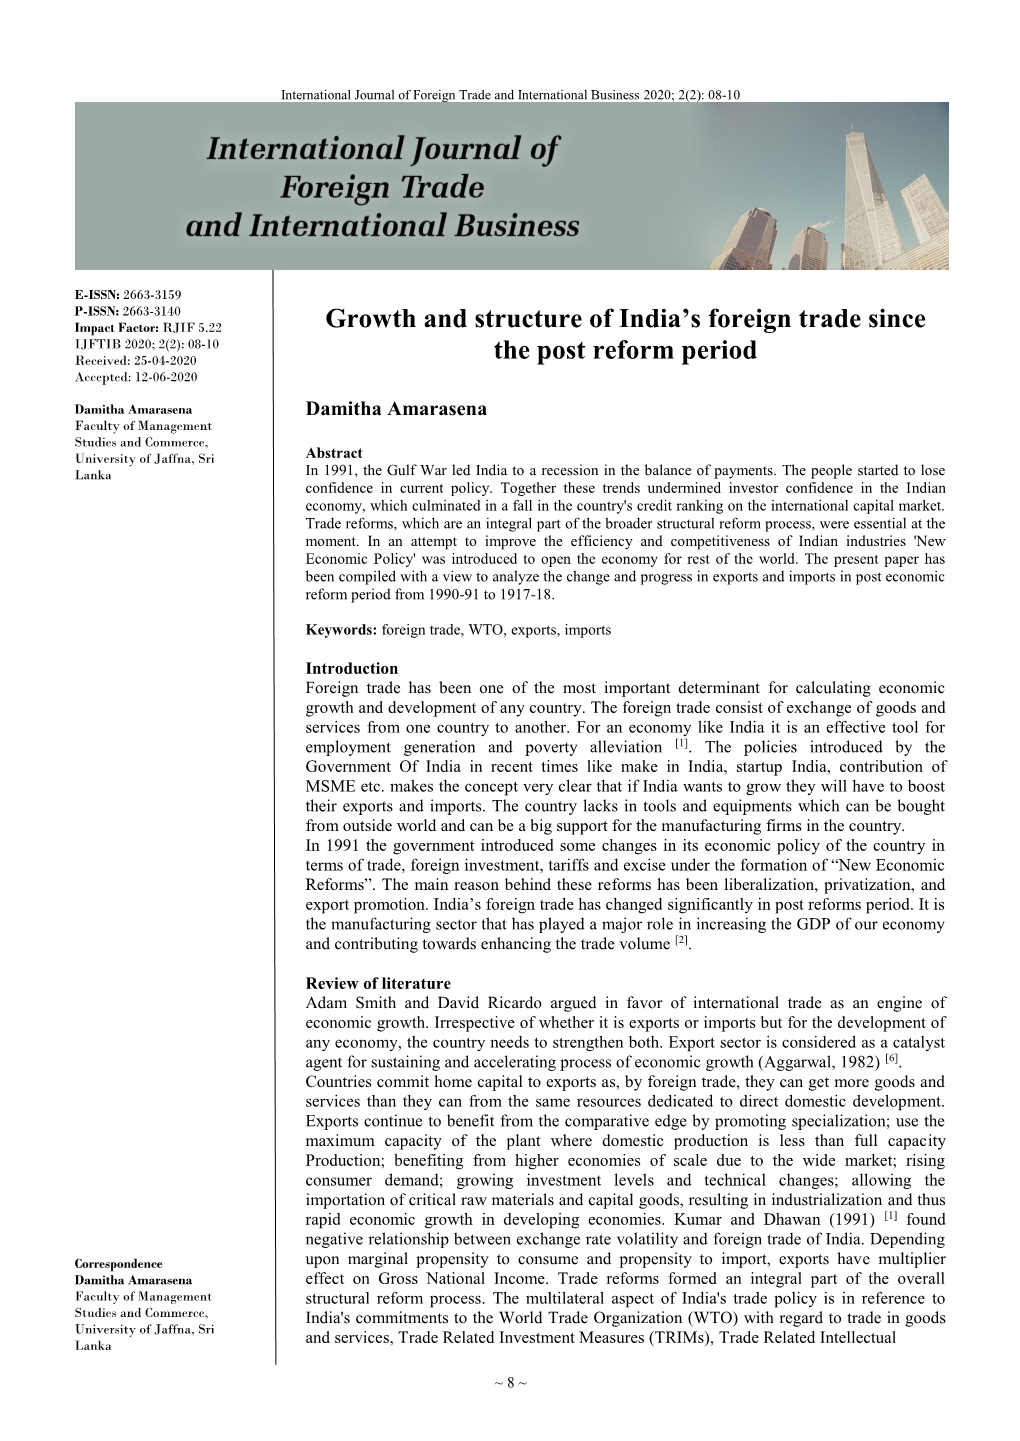 Growth and Structure of India's Foreign Trade Since the Post Reform Period